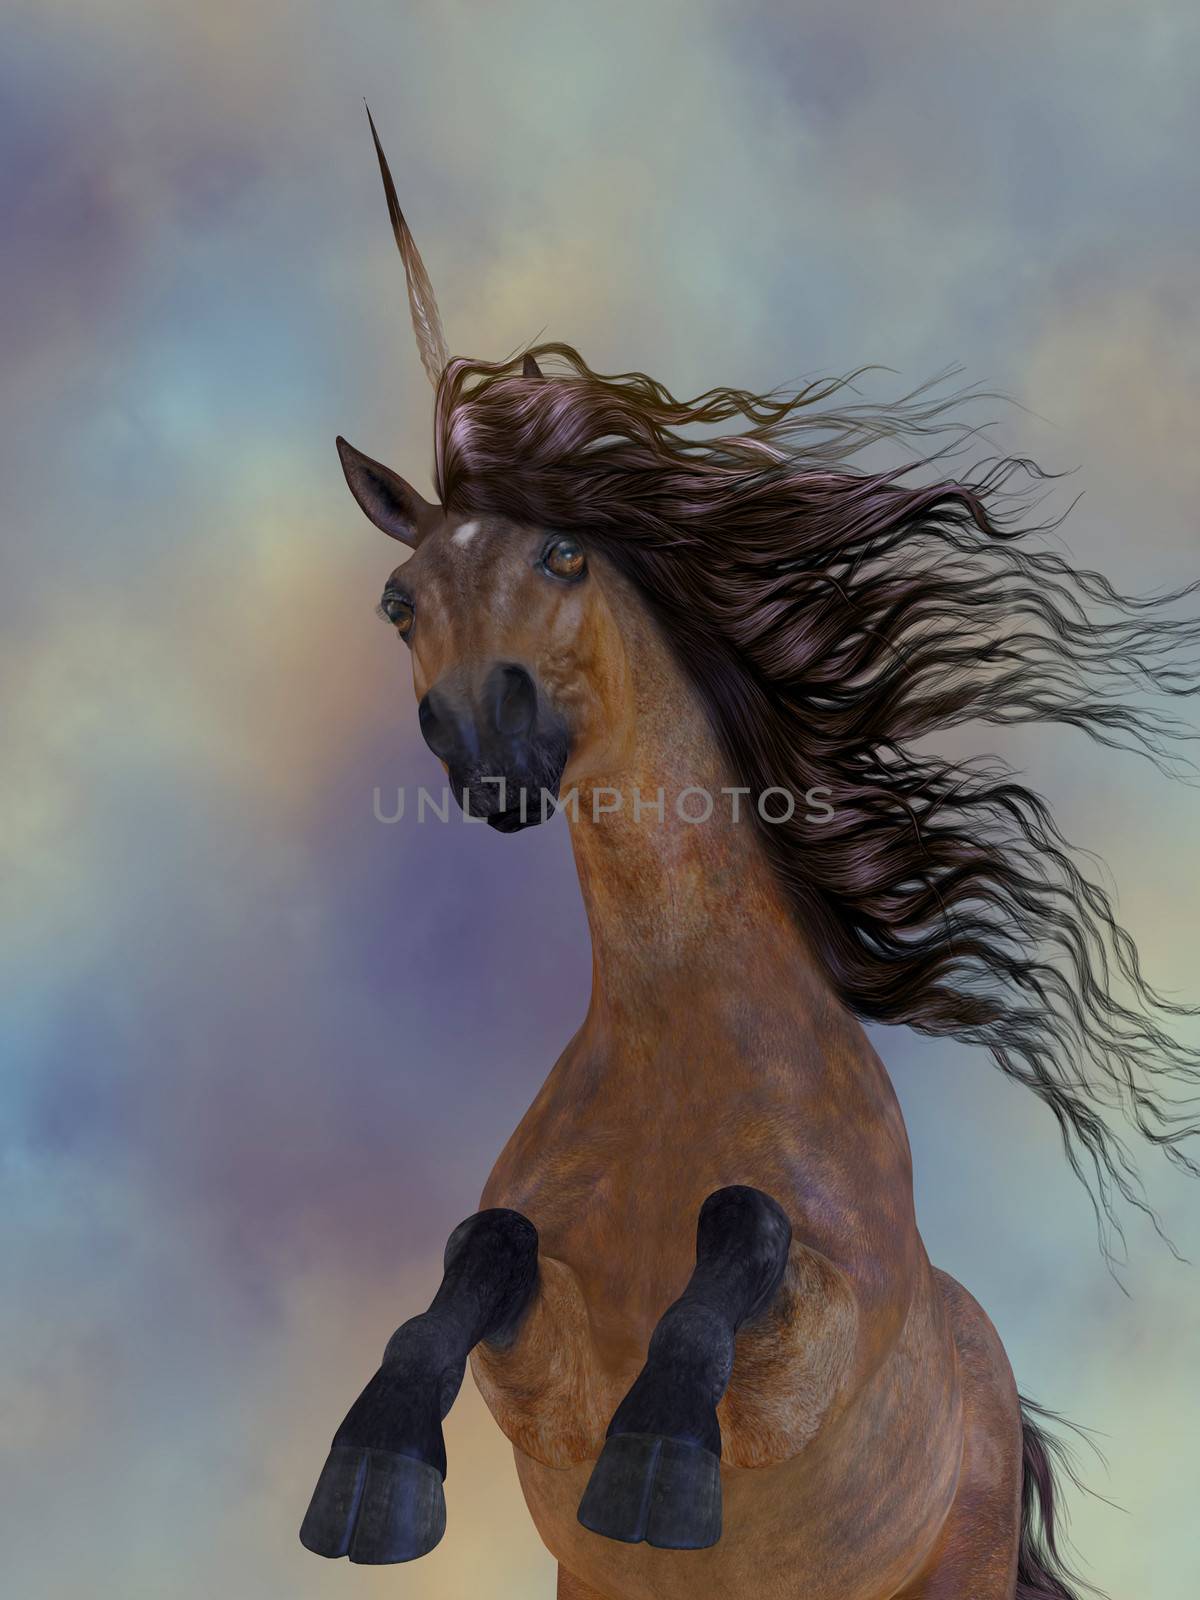 A beautiful chestnut unicorn prances with its wild mane flowing and muscles shining.